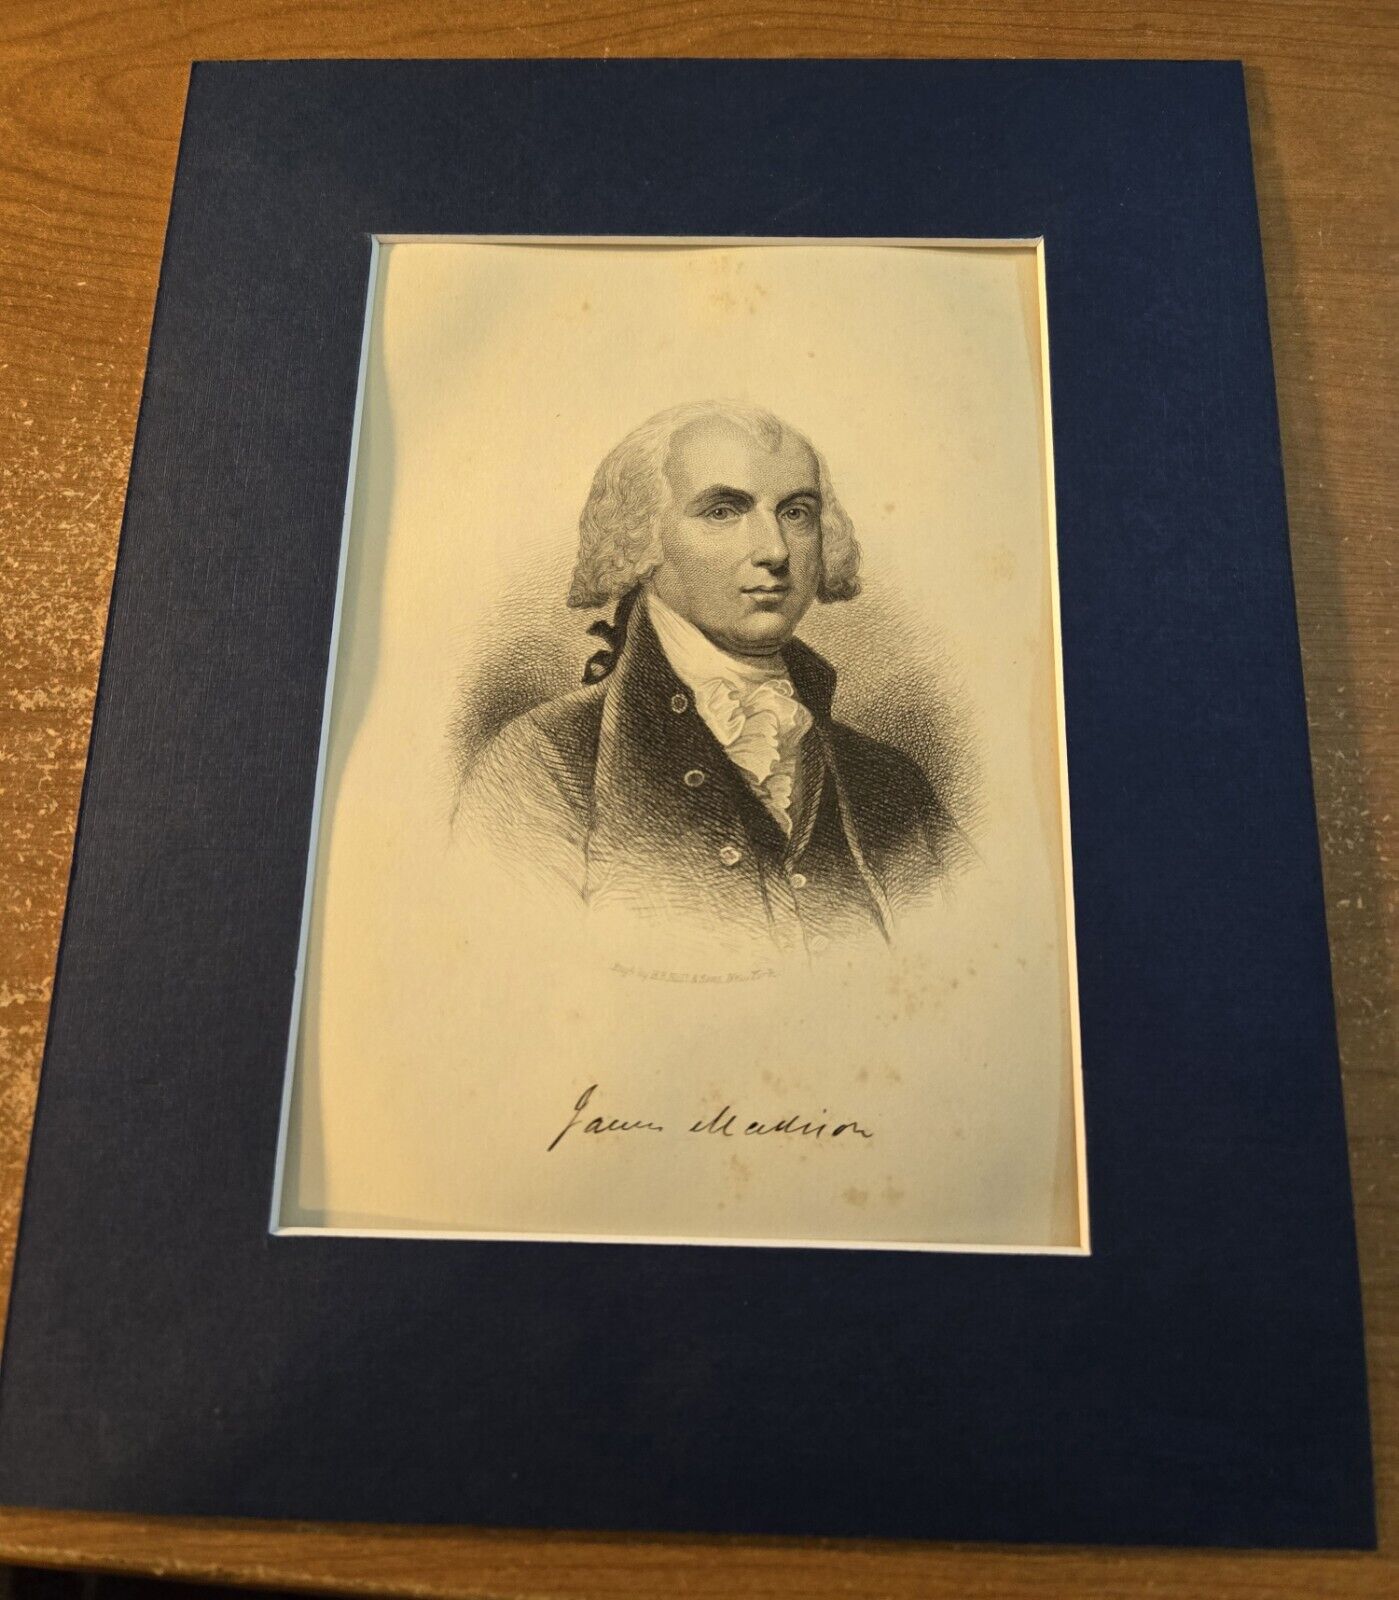 James Madison - Authentic 1889 Steel Engraving w/Signature - Matted